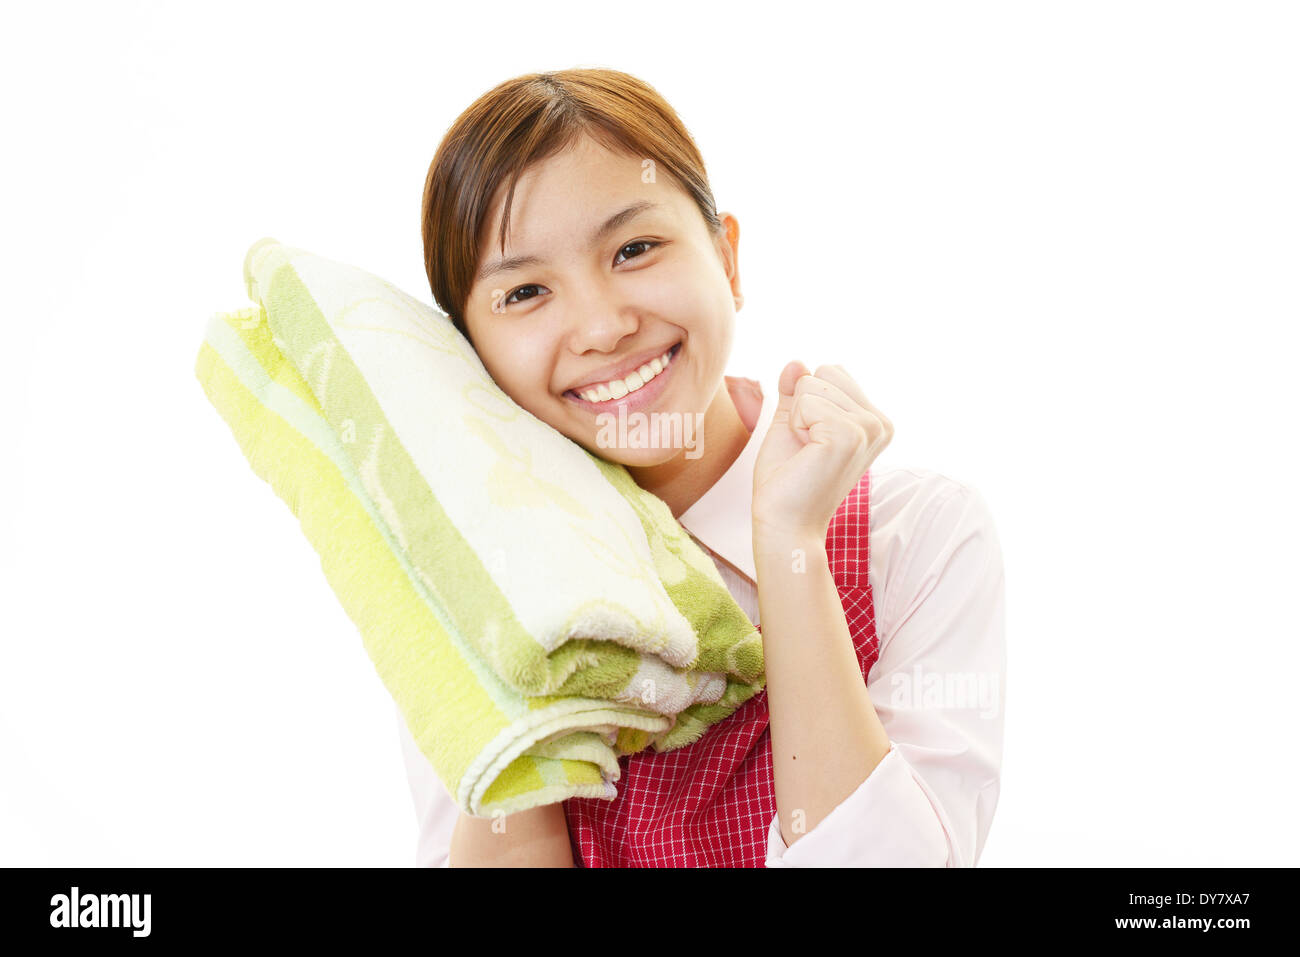 Smiling housewife Stock Photo